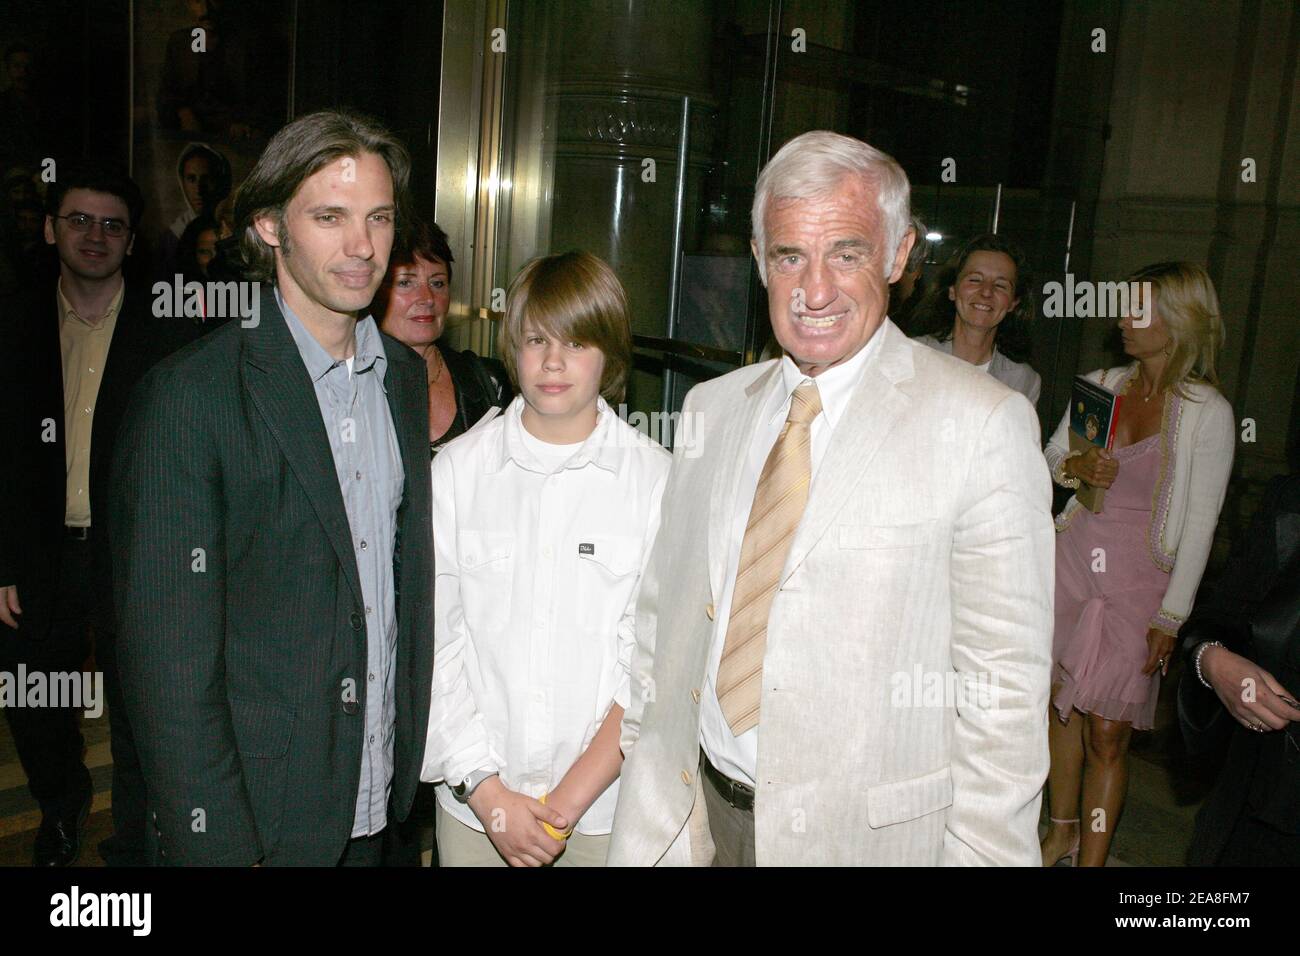 L to R) French actor Jean-Paul Belmondo's son Paul Belmondo, Paul's son  Alessandro and Jean-Paul Belmondo pictured during the opening ceremony of  the 2nd Festival Paris Cinema at the Hotel de Ville (